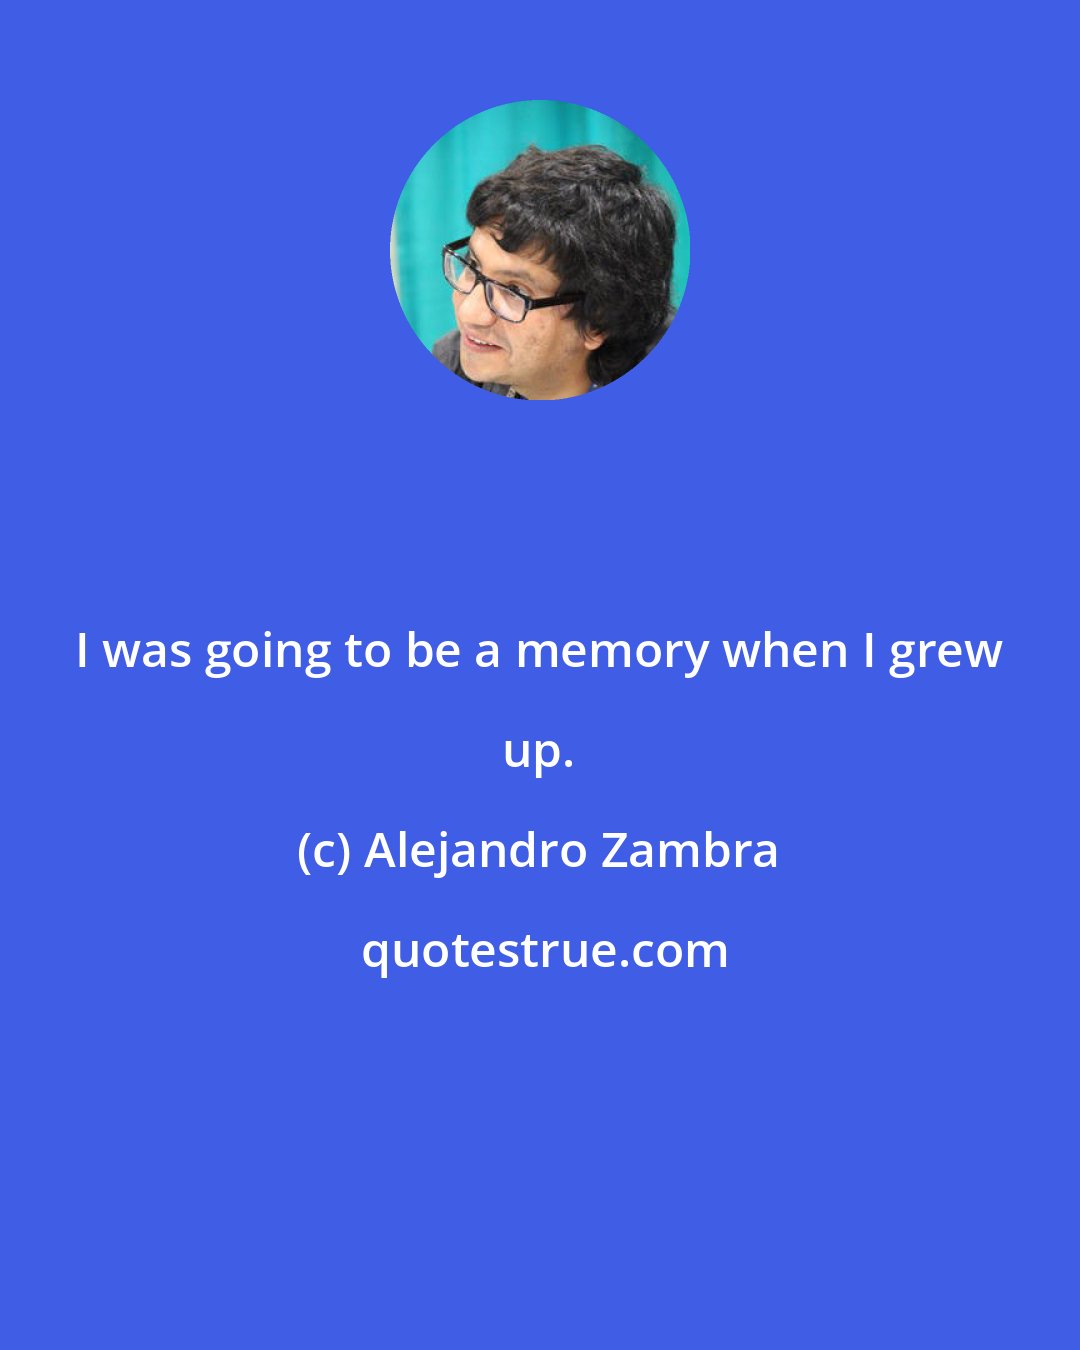 Alejandro Zambra: I was going to be a memory when I grew up.